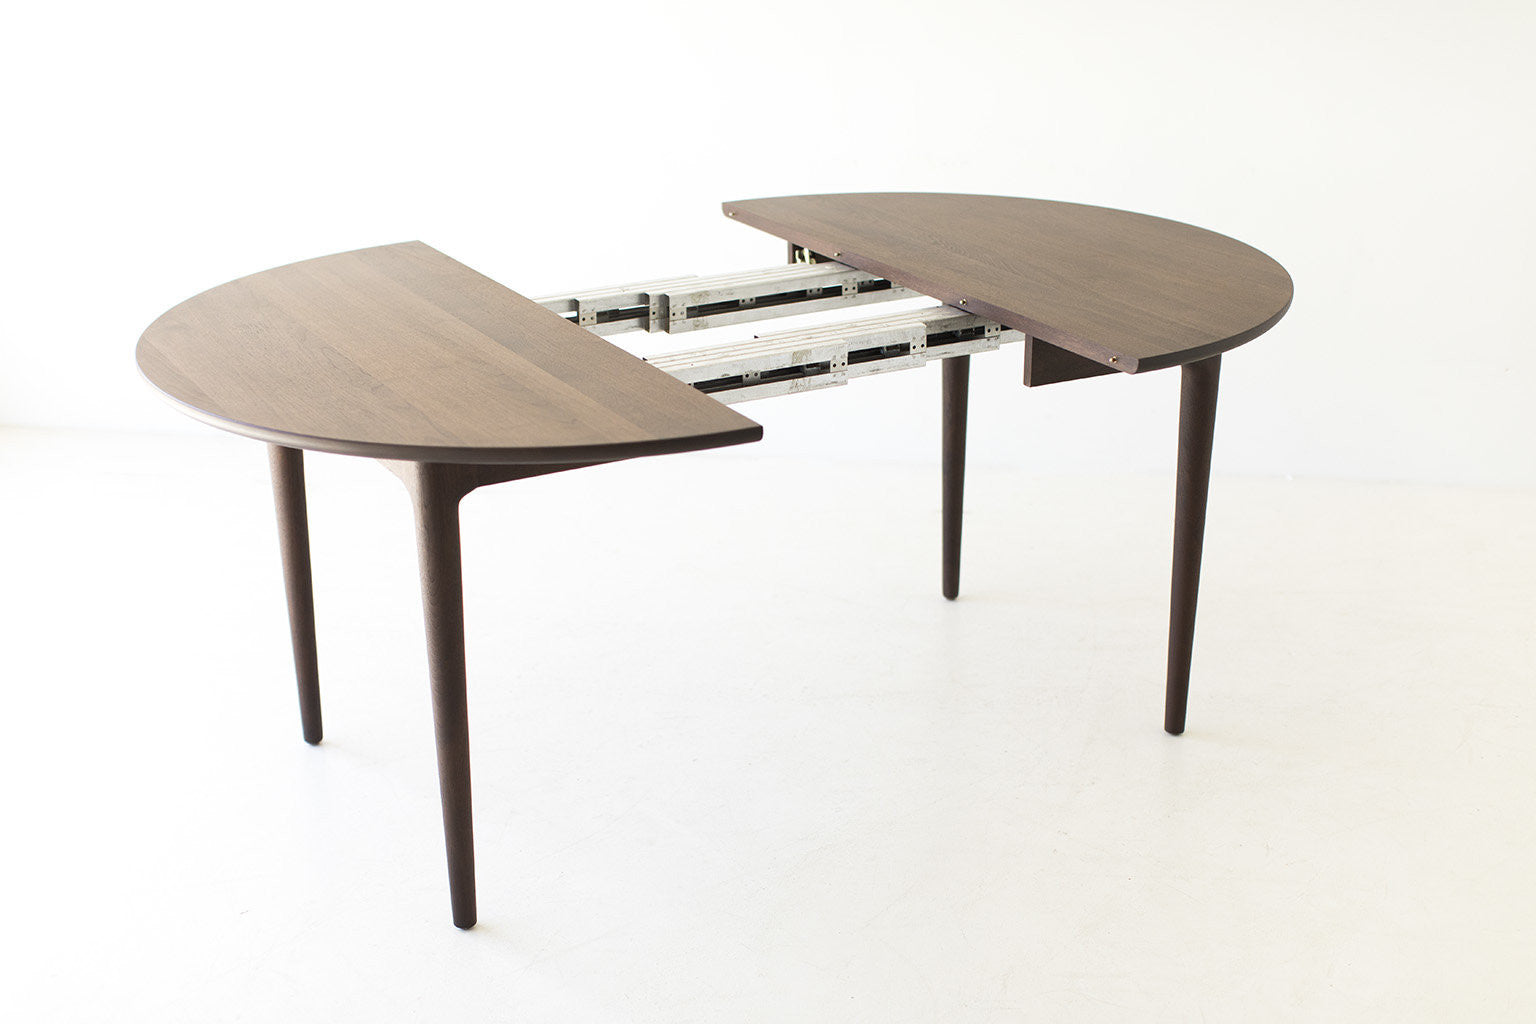 Lawrence-Peabody-Dining-Table-P-1707-Craft-Associates-Furniture-05